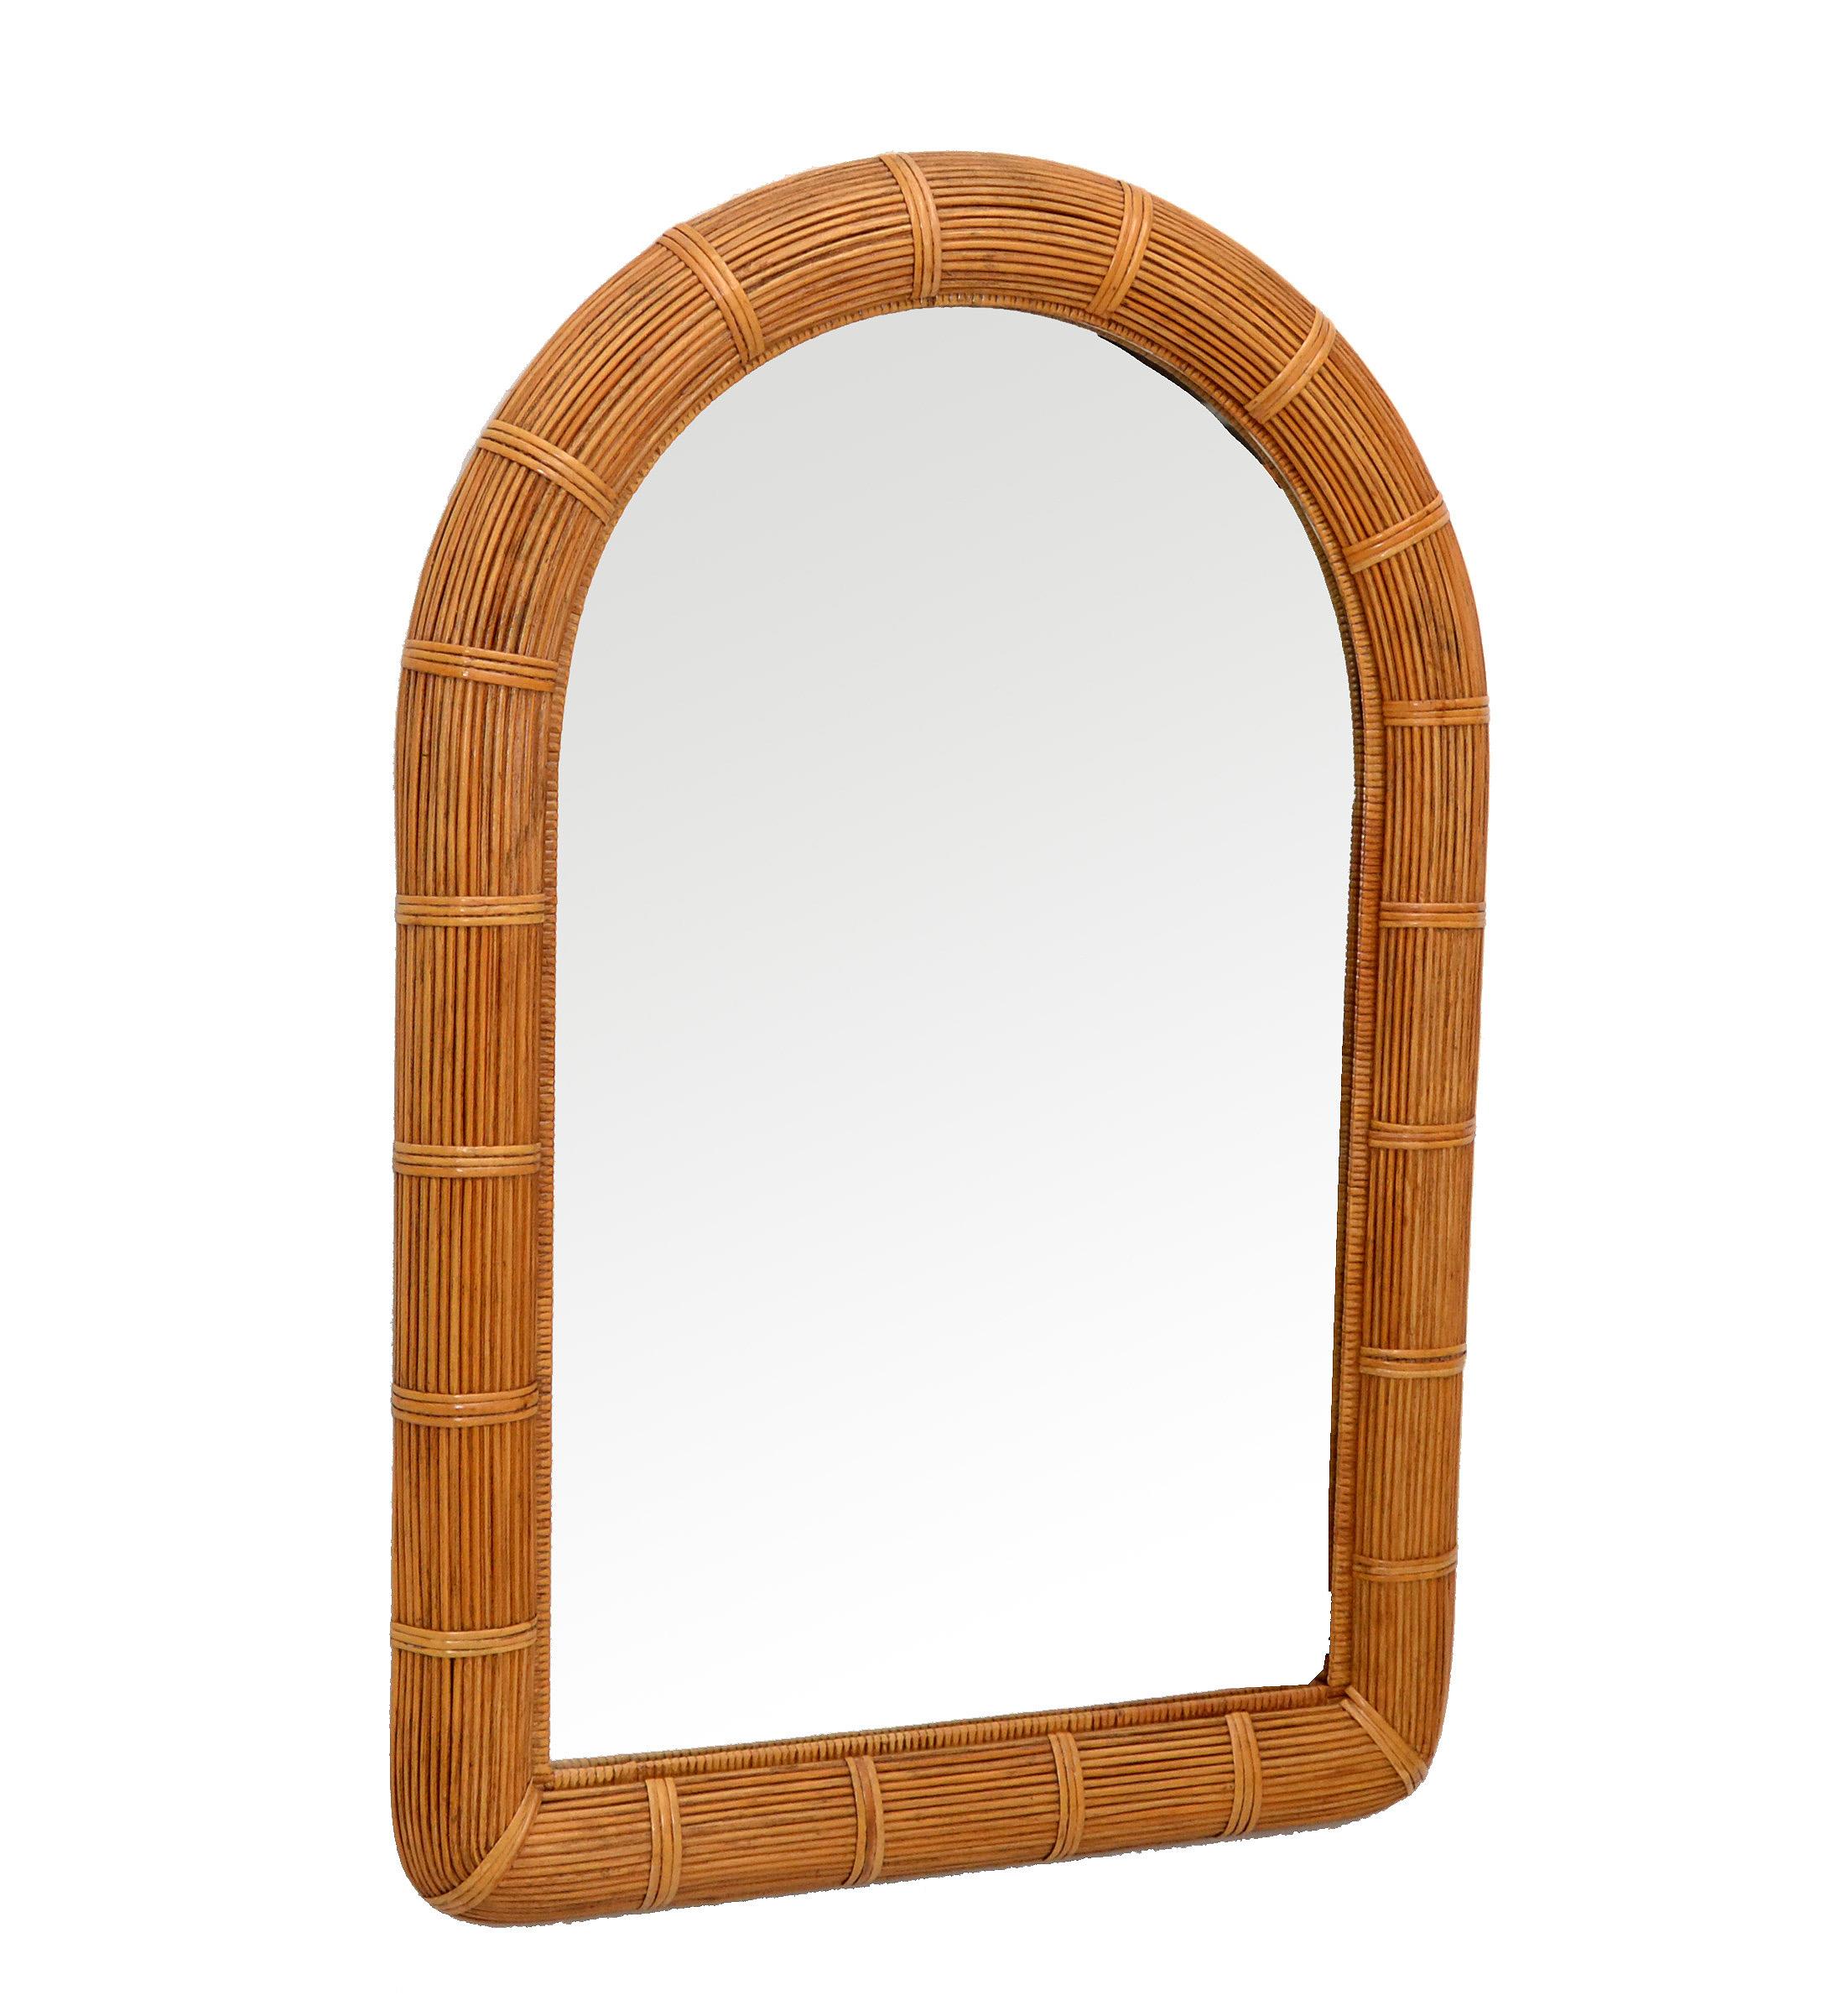 Mid-Century Modern Coastal Bohemian chic arch shaped handwoven pencil reed and wicker wall mirror.
Exemplary construction bent pencil reed are firmly lined on a sturdy wooden backing.
Florida Design for Your Sunroom.
Mirror size: 21 x 35 inches